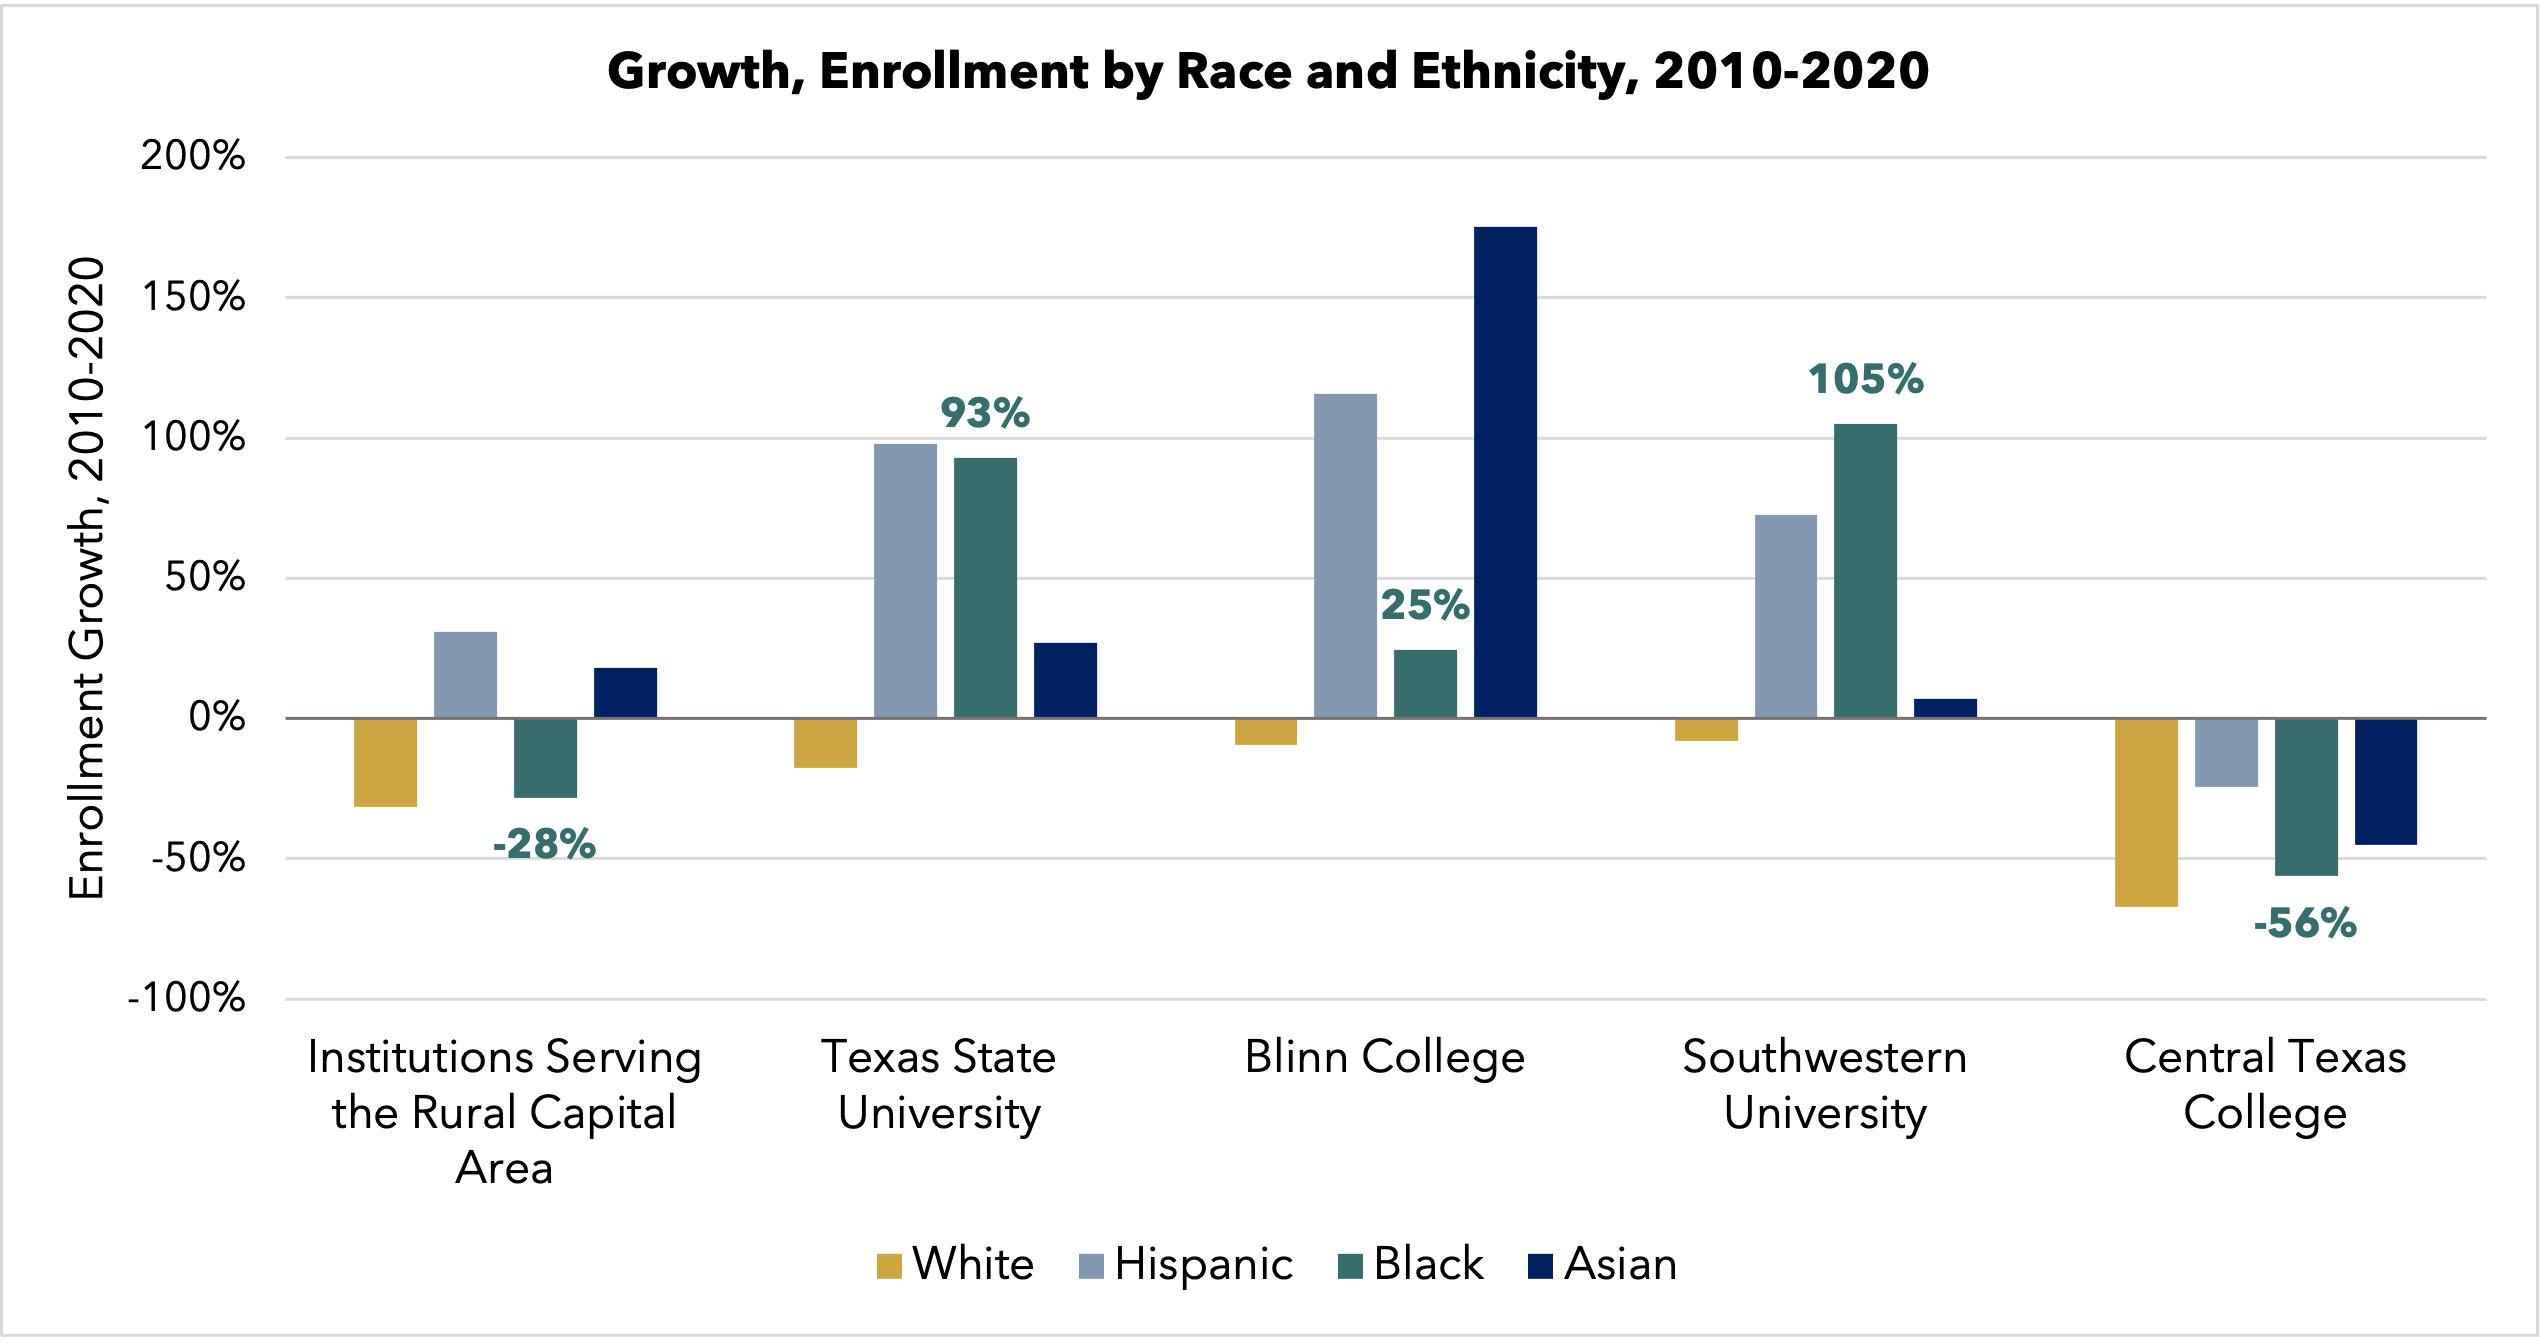 Rural Captial Area Enrollment Growth by Race and Ethnicity 2020